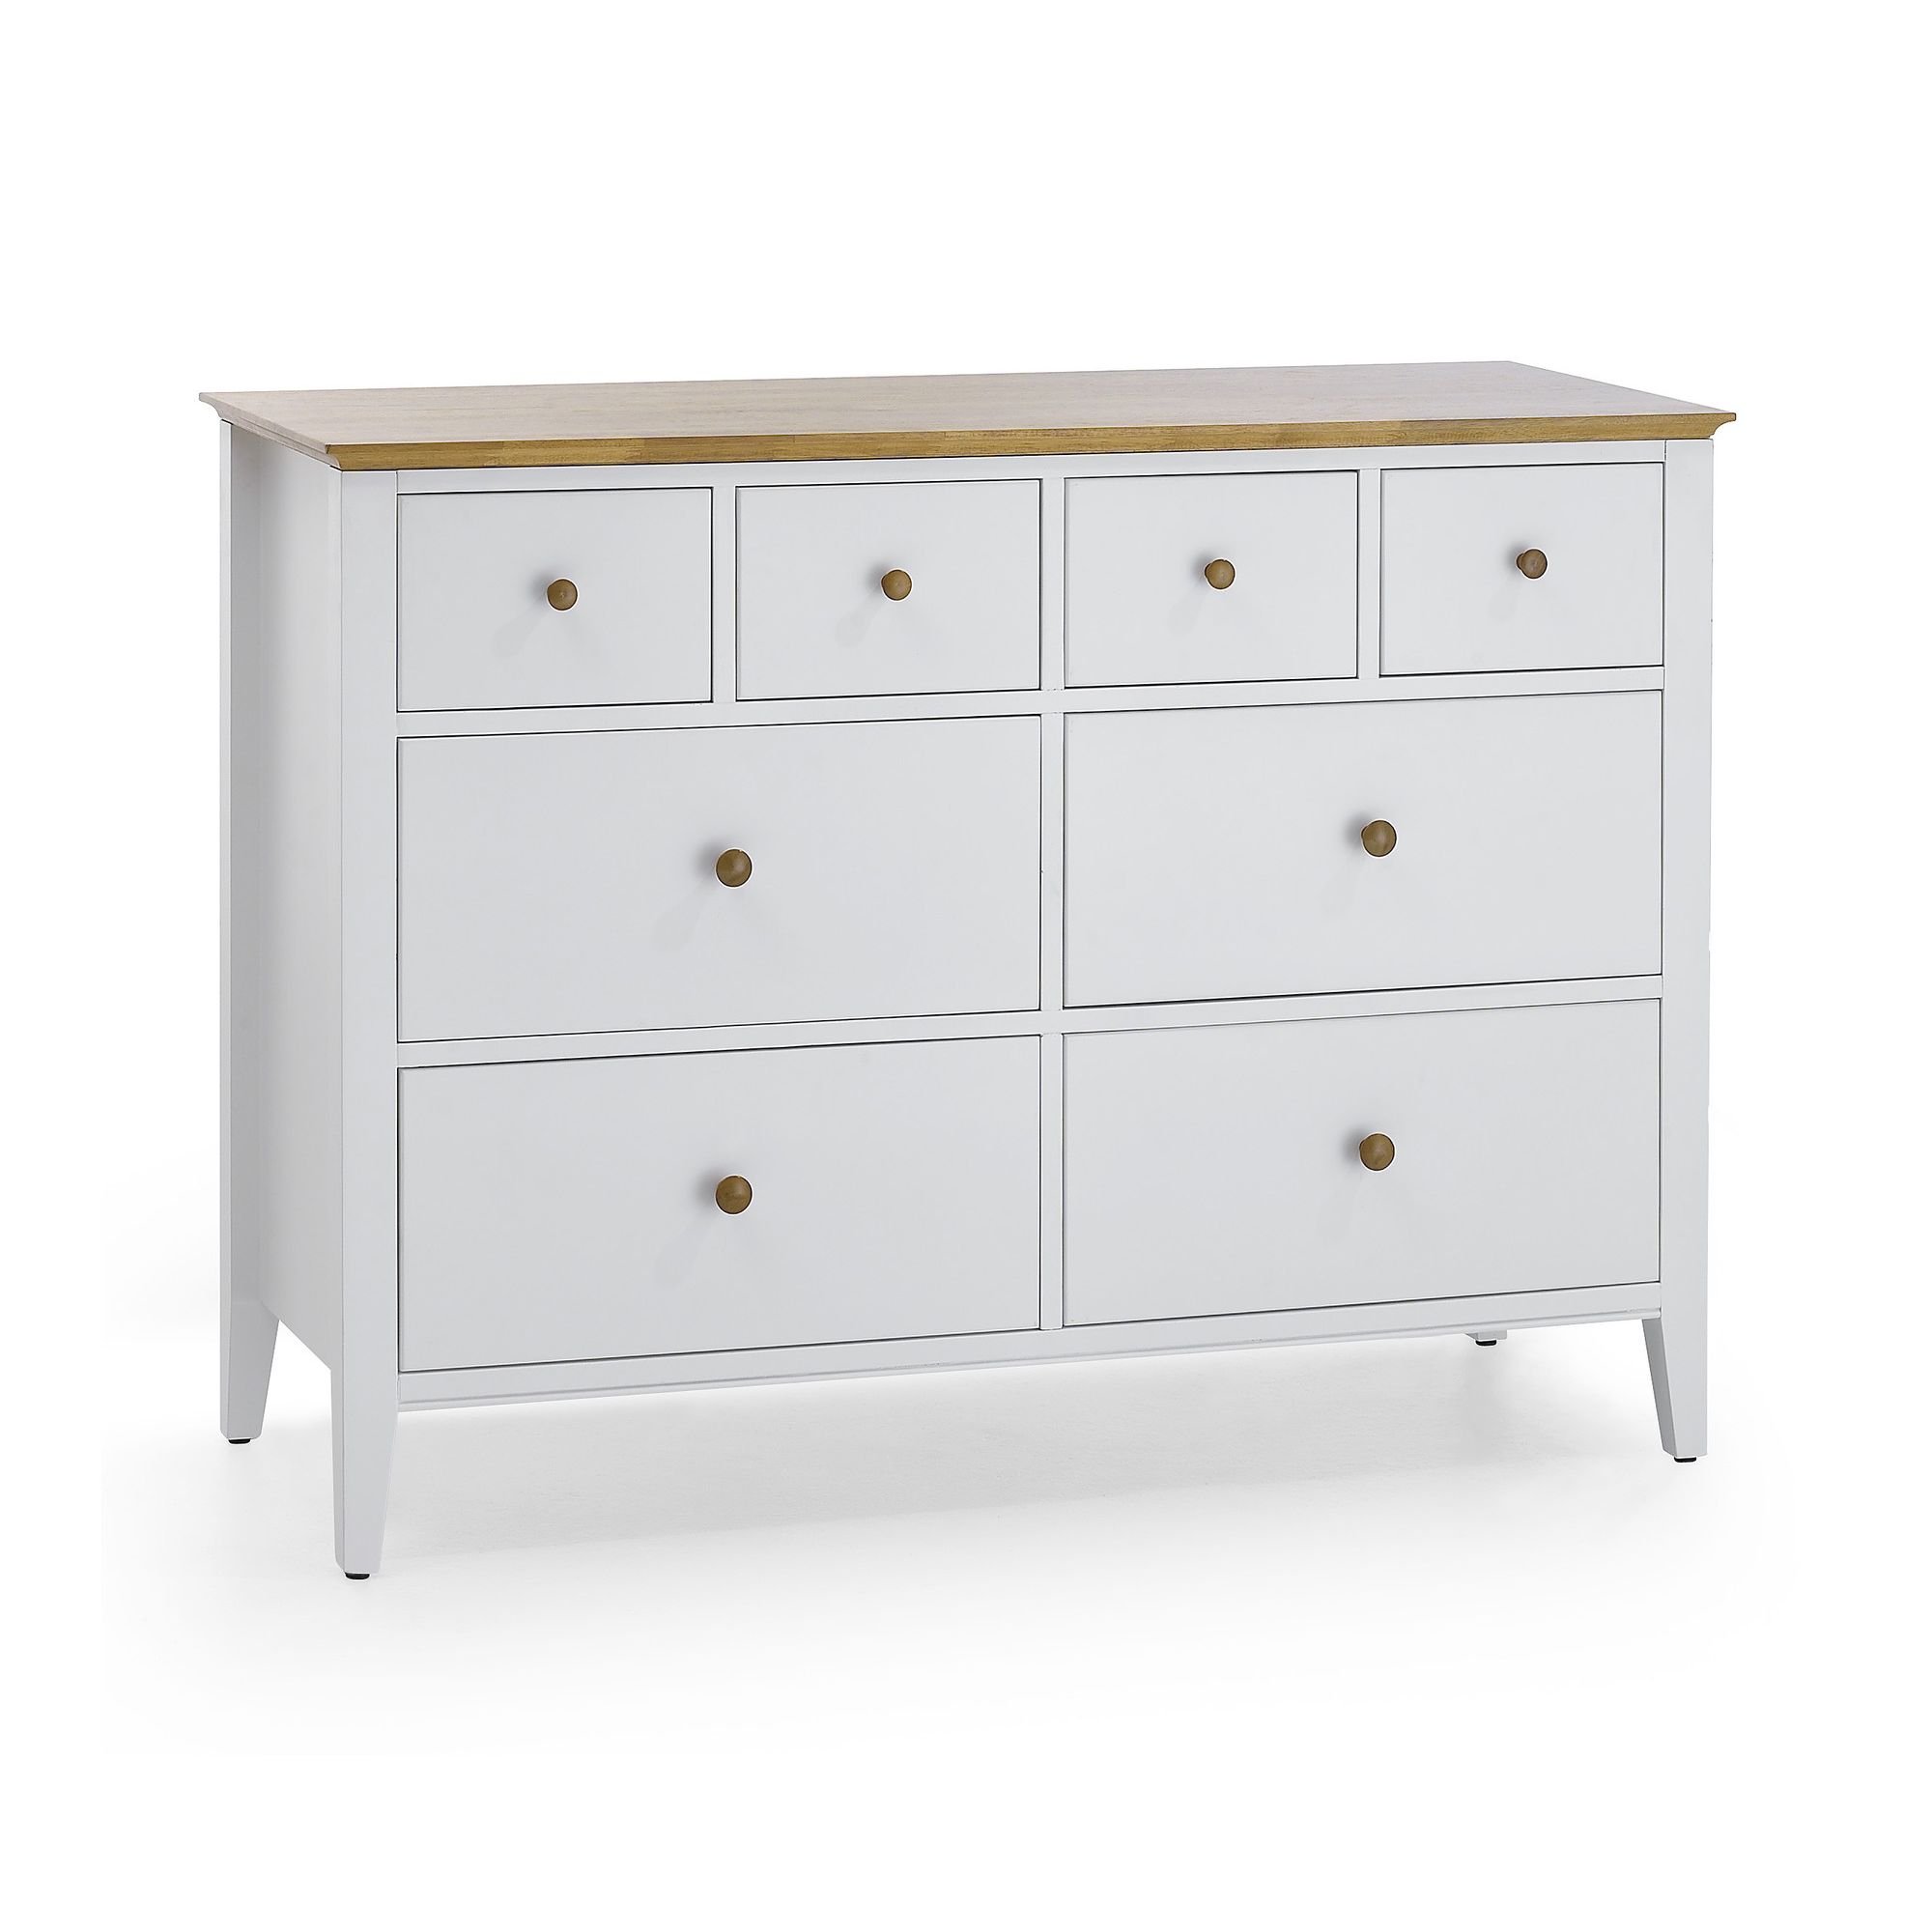 Serene Furnishings Grace 8 Drawer Chest - Golden Cherry with Opal White at Tesco Direct